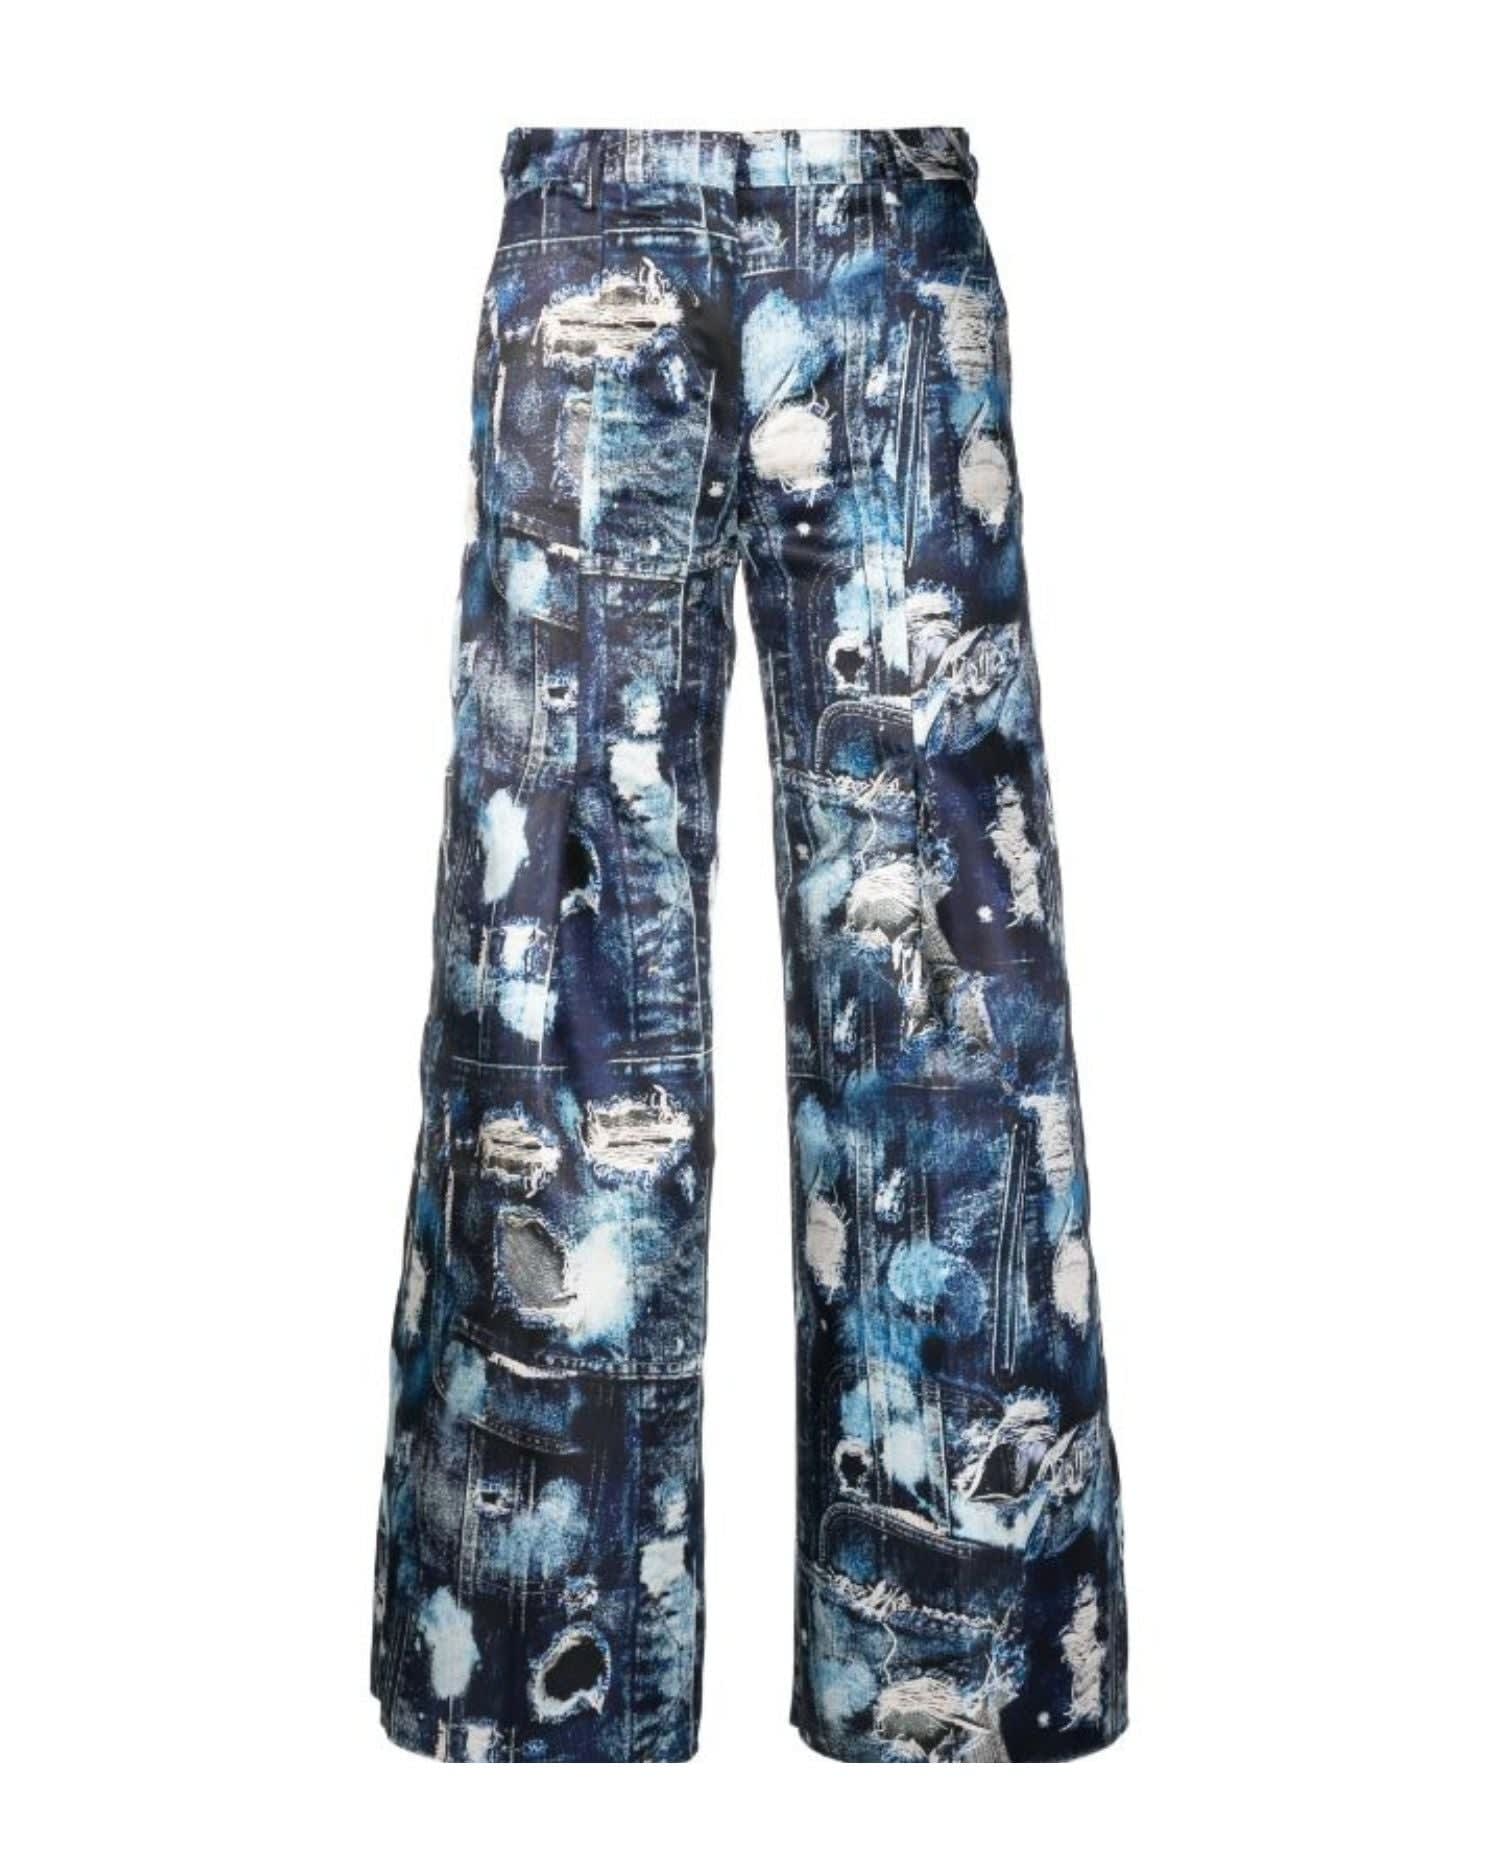 Cropped Trousers With Wide Leg And Iconic Runway Denim-effect Pattern.